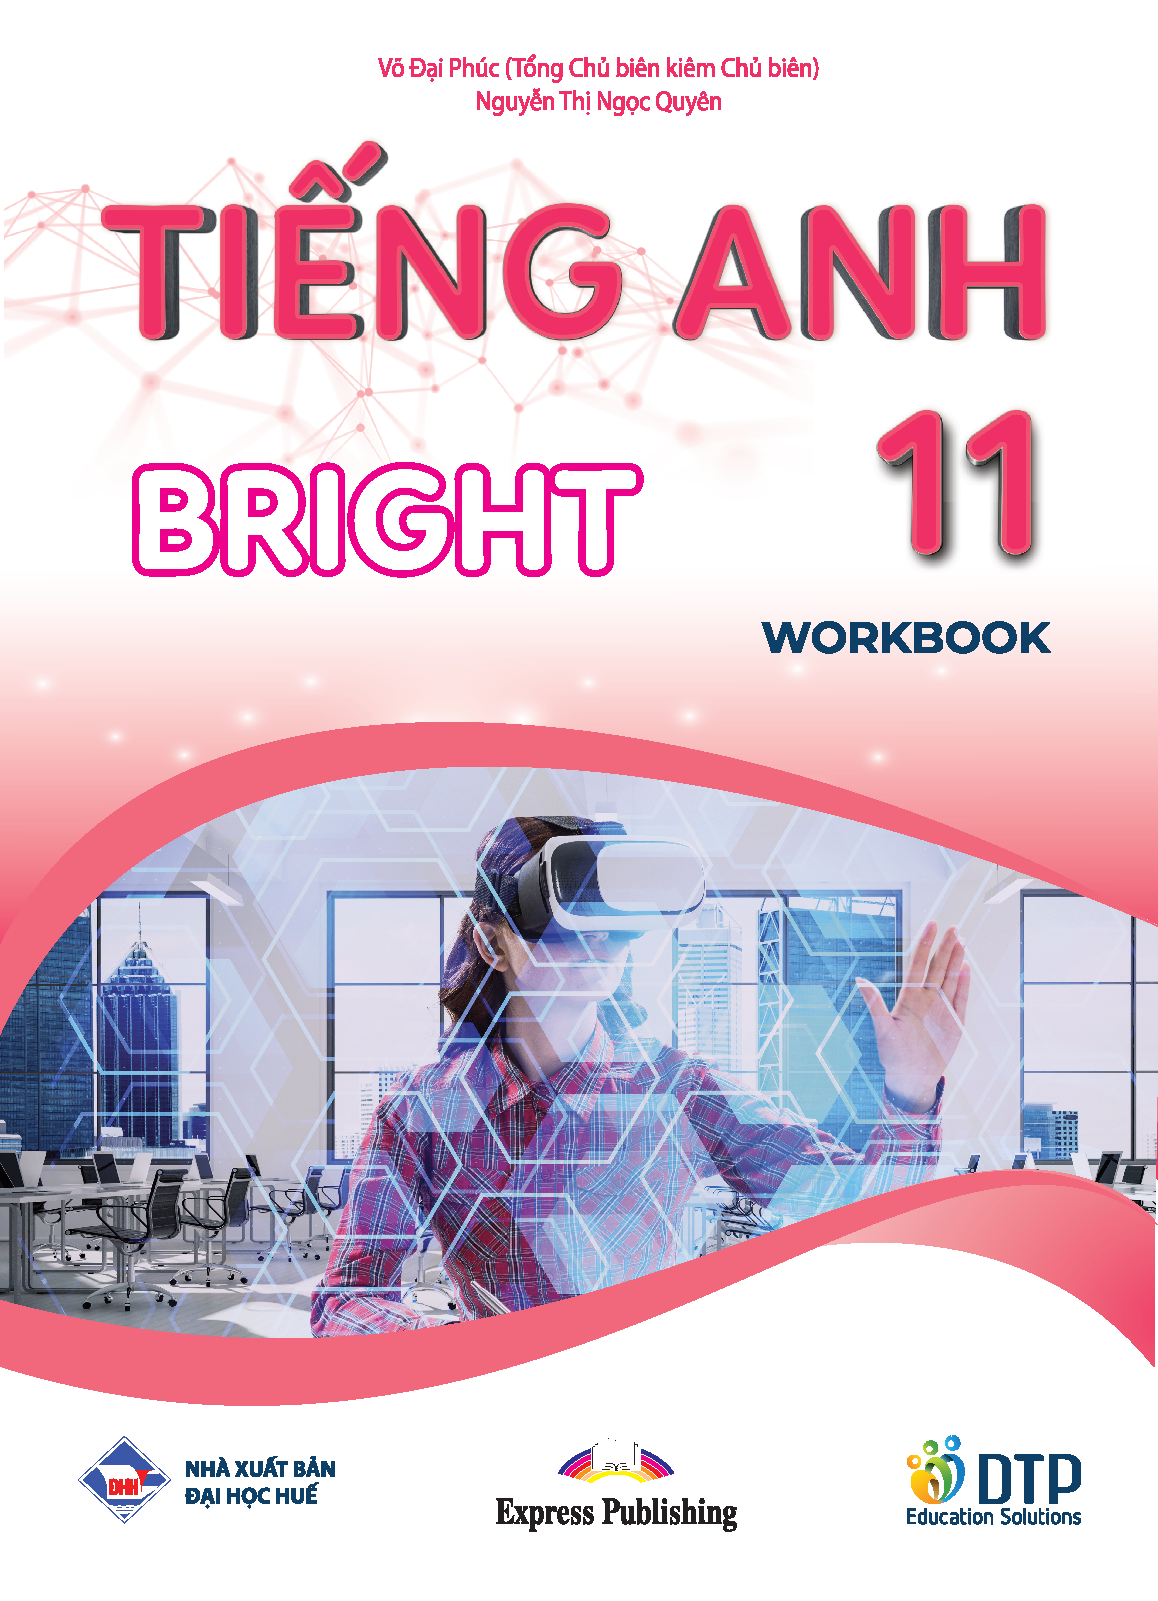 Tiếng Anh 11 Bright - Workbook Book